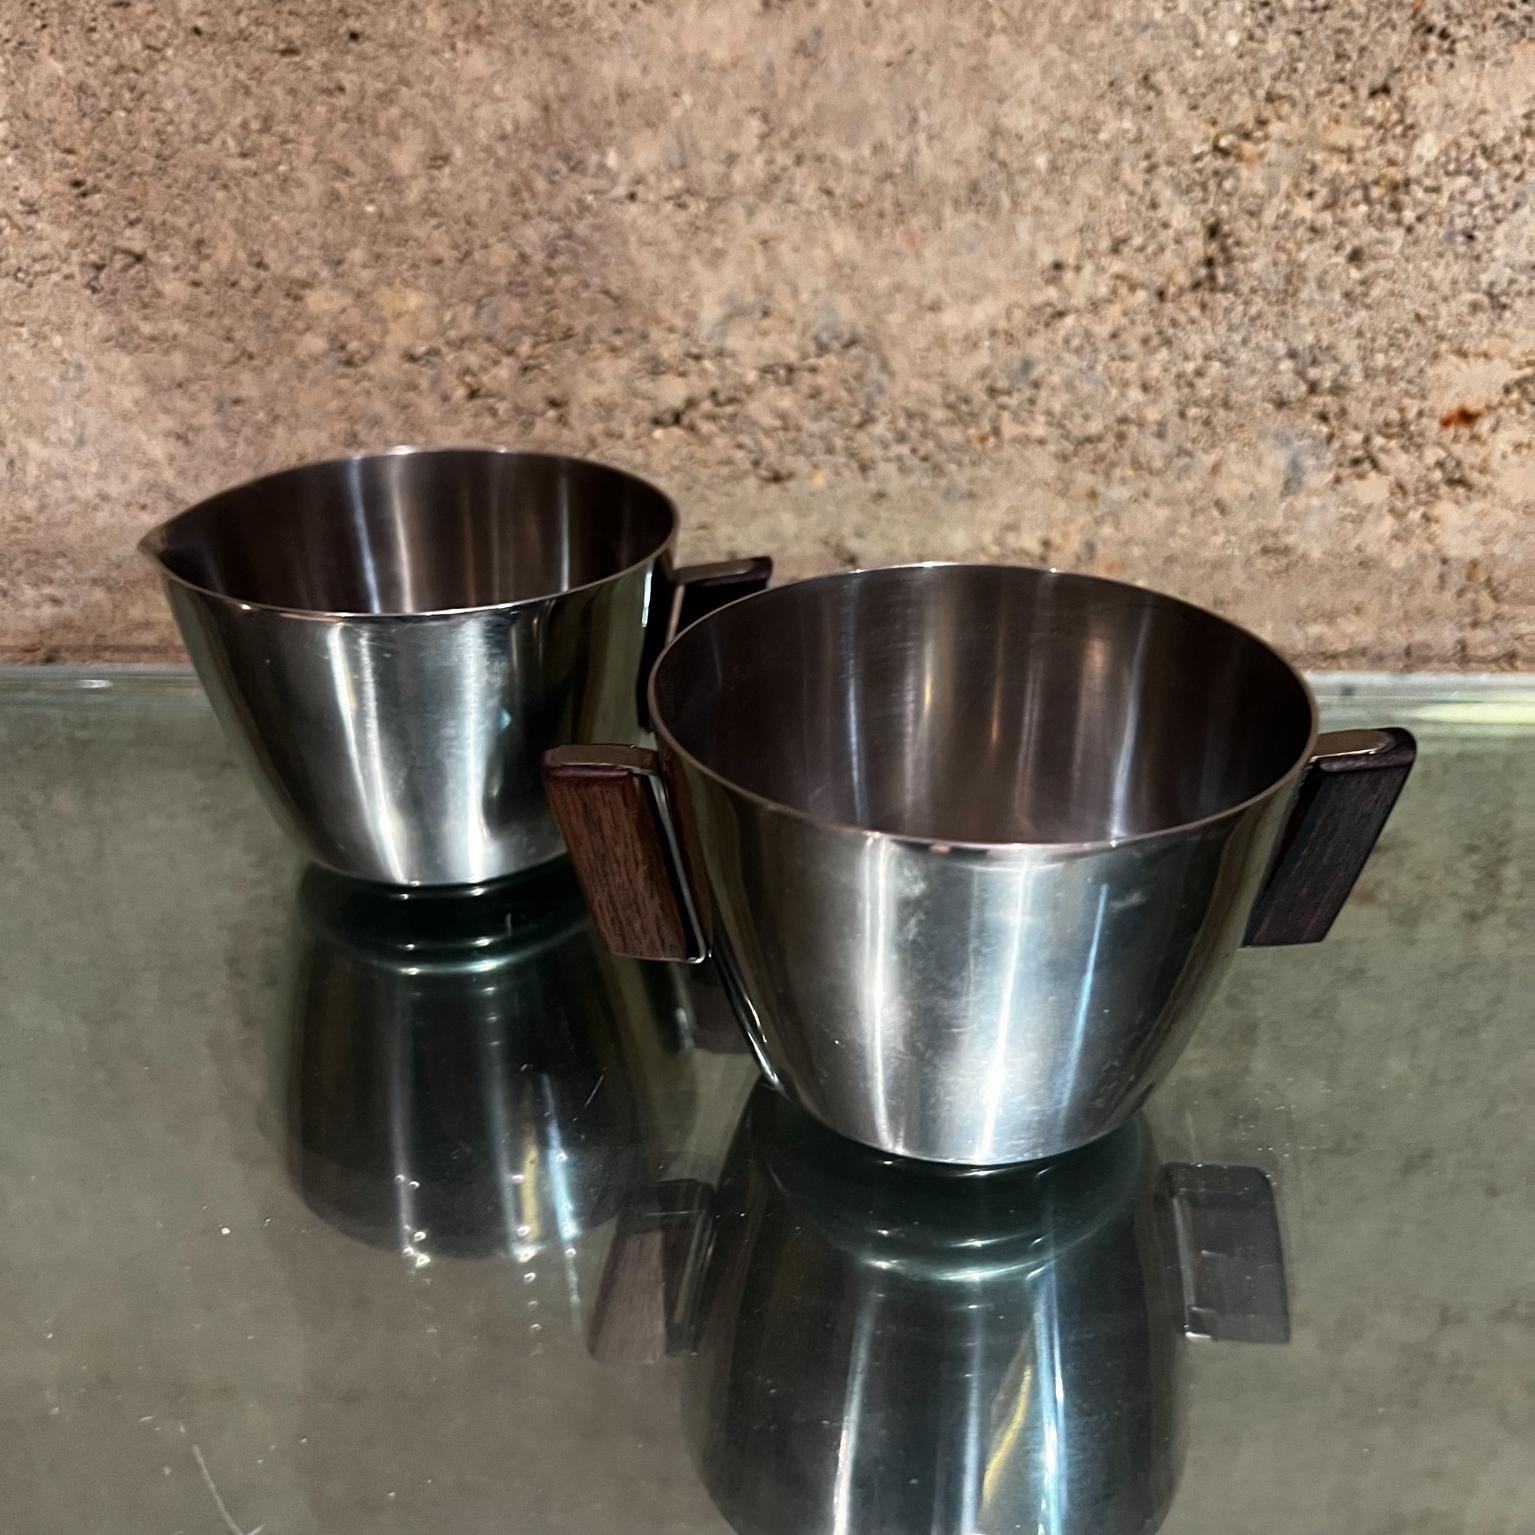 Late 20th Century 1970s by MCH Stainless Sugar & Creamer Set Exotic Wood Handle Denmark For Sale